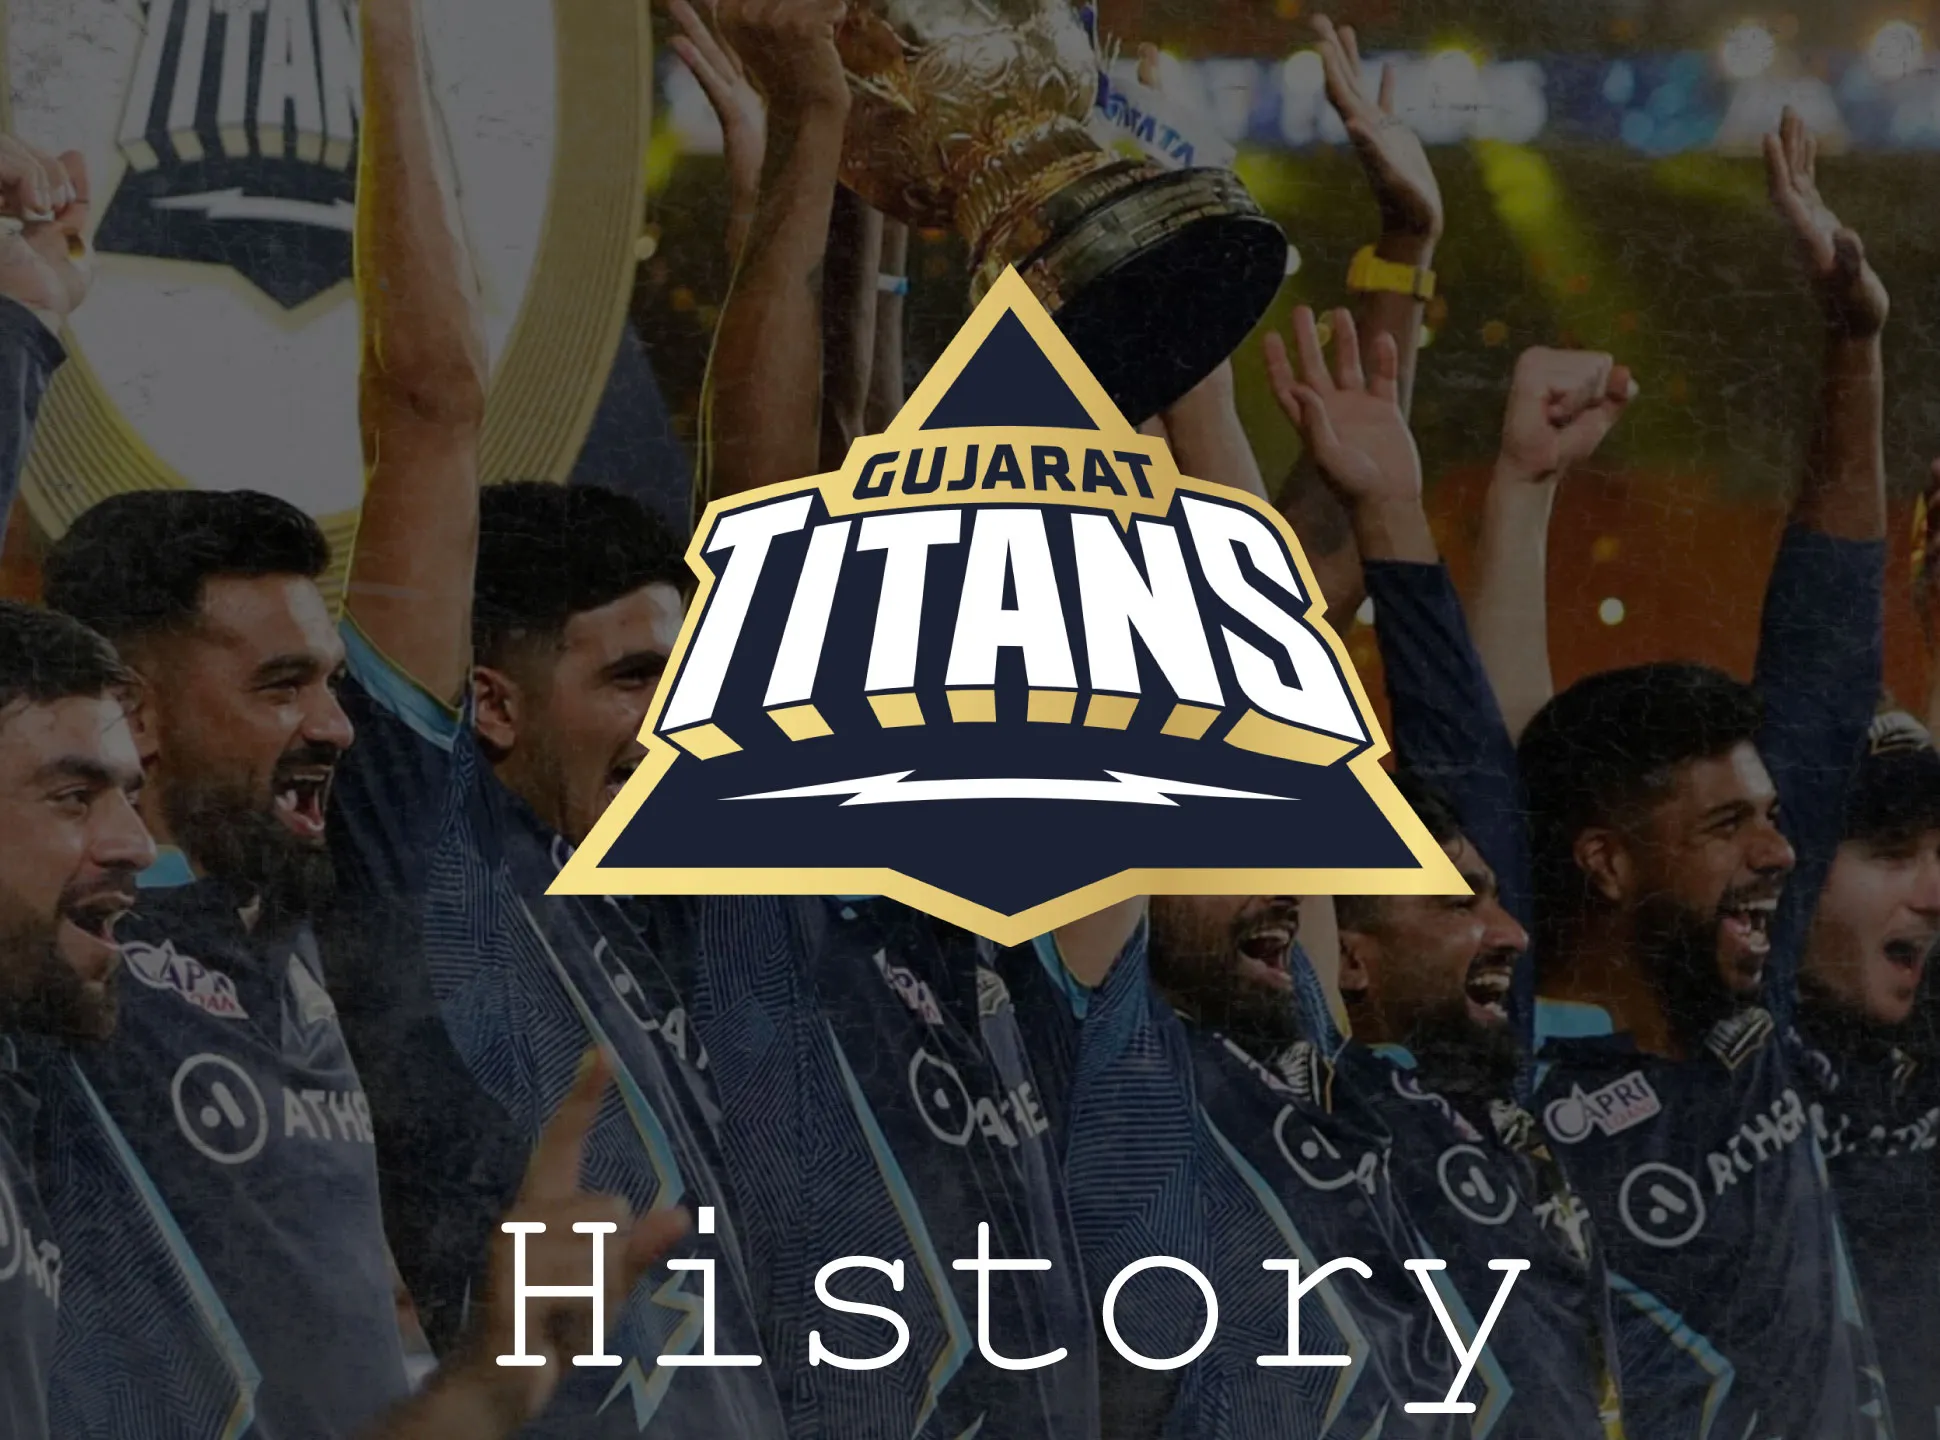 Gujarat Titans is a young team and new to the IPL.